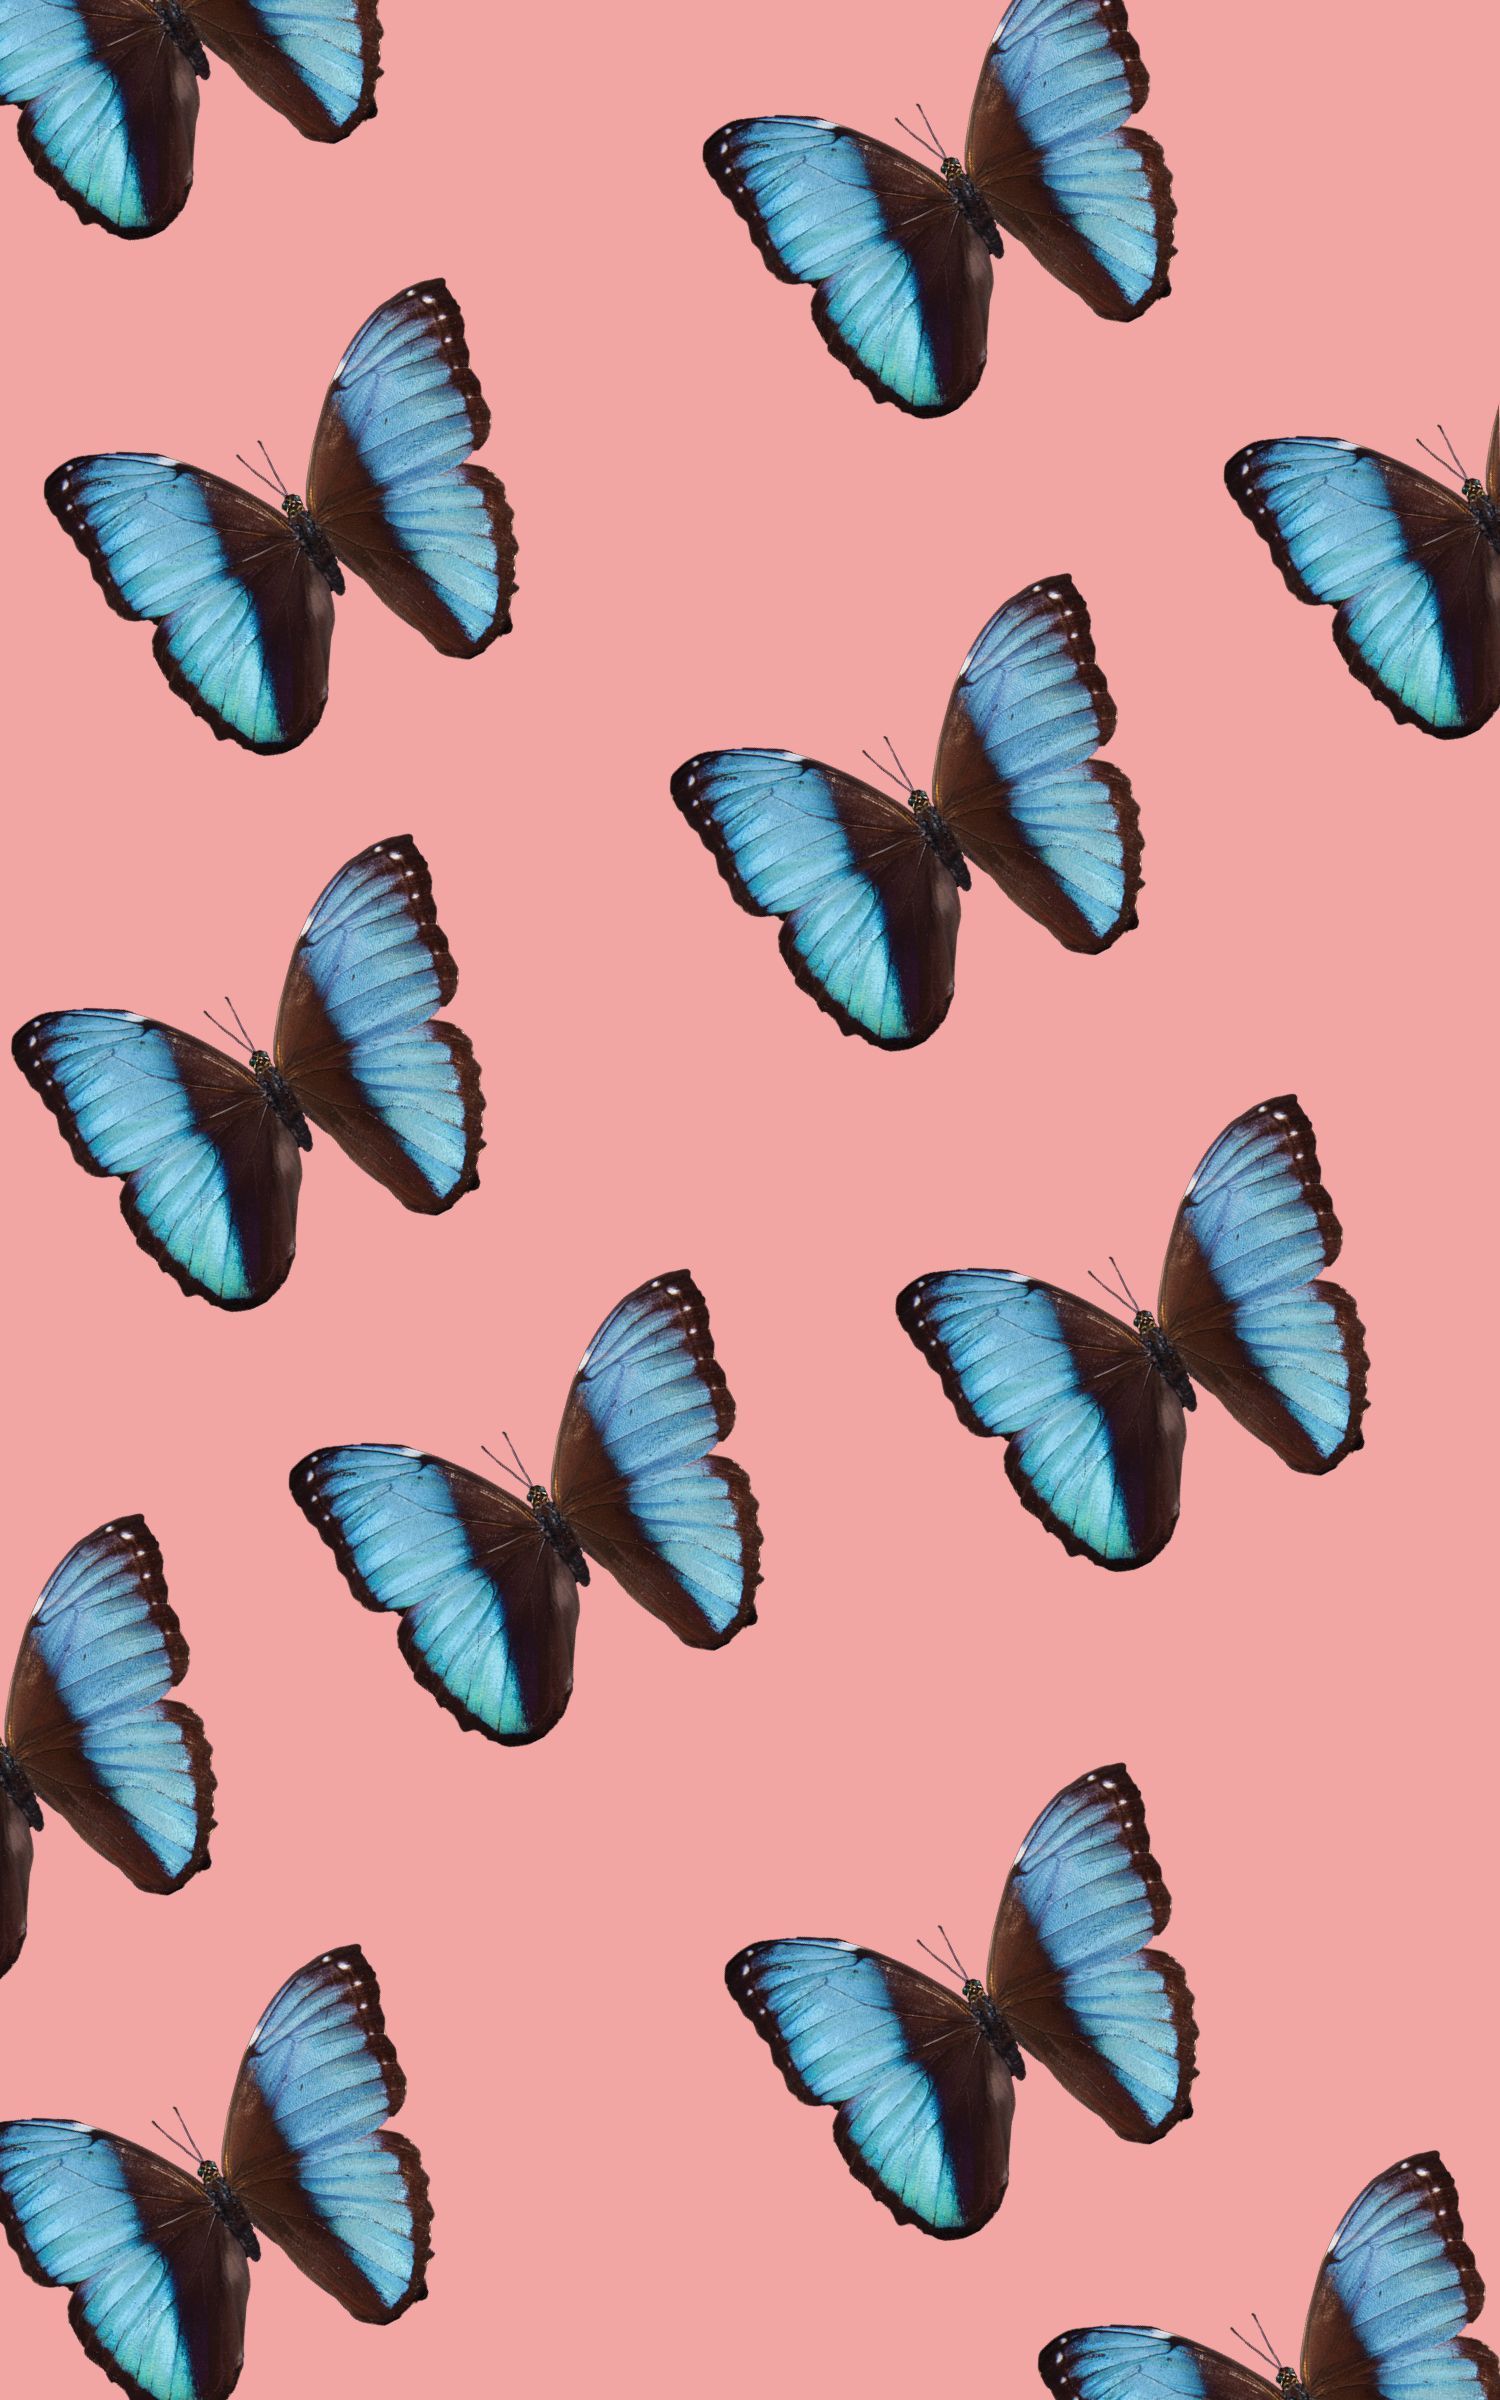 Butterfly Aesthetics Wallpapers - Wallpaper Cave